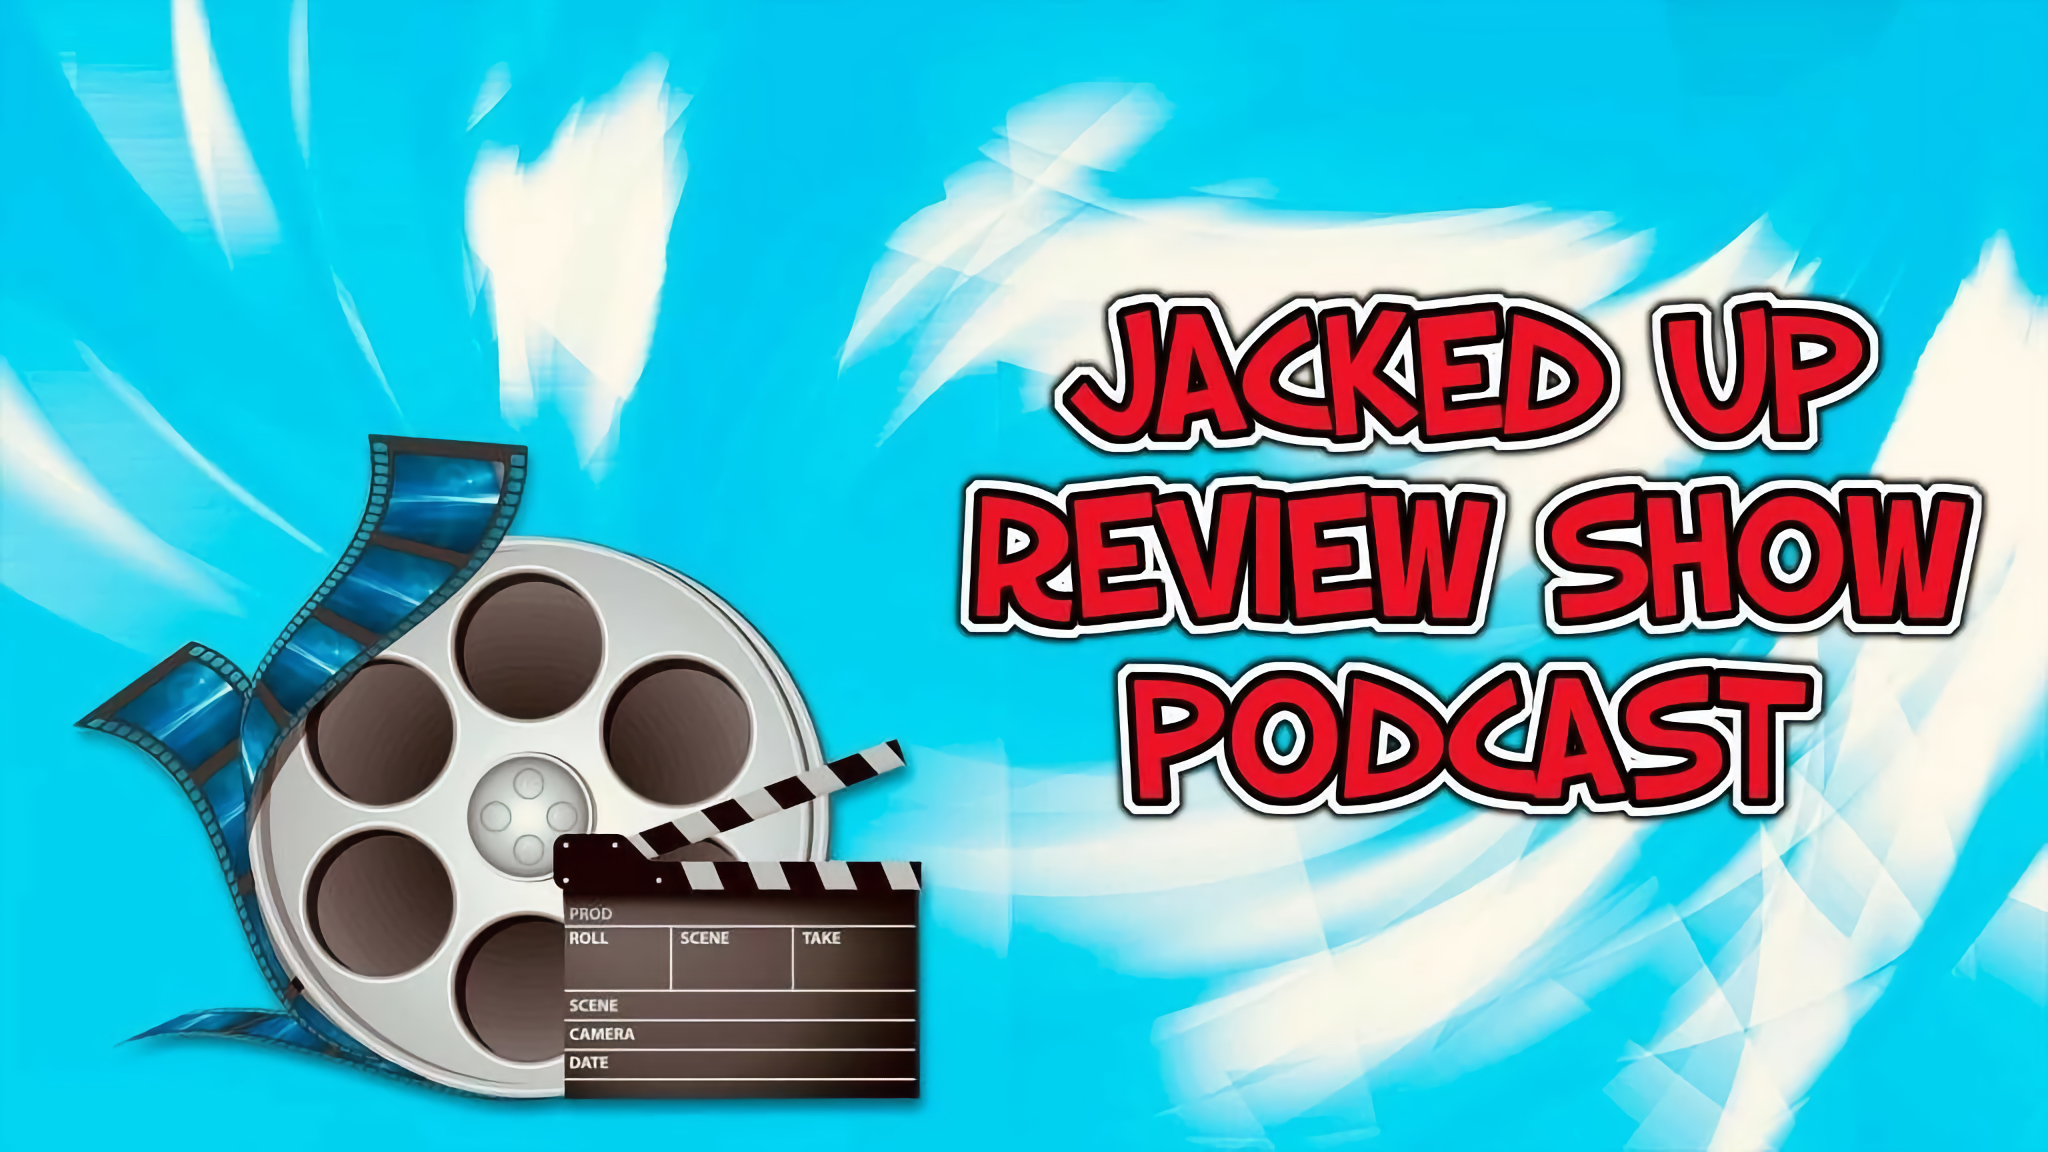 Jacked Up Review Show